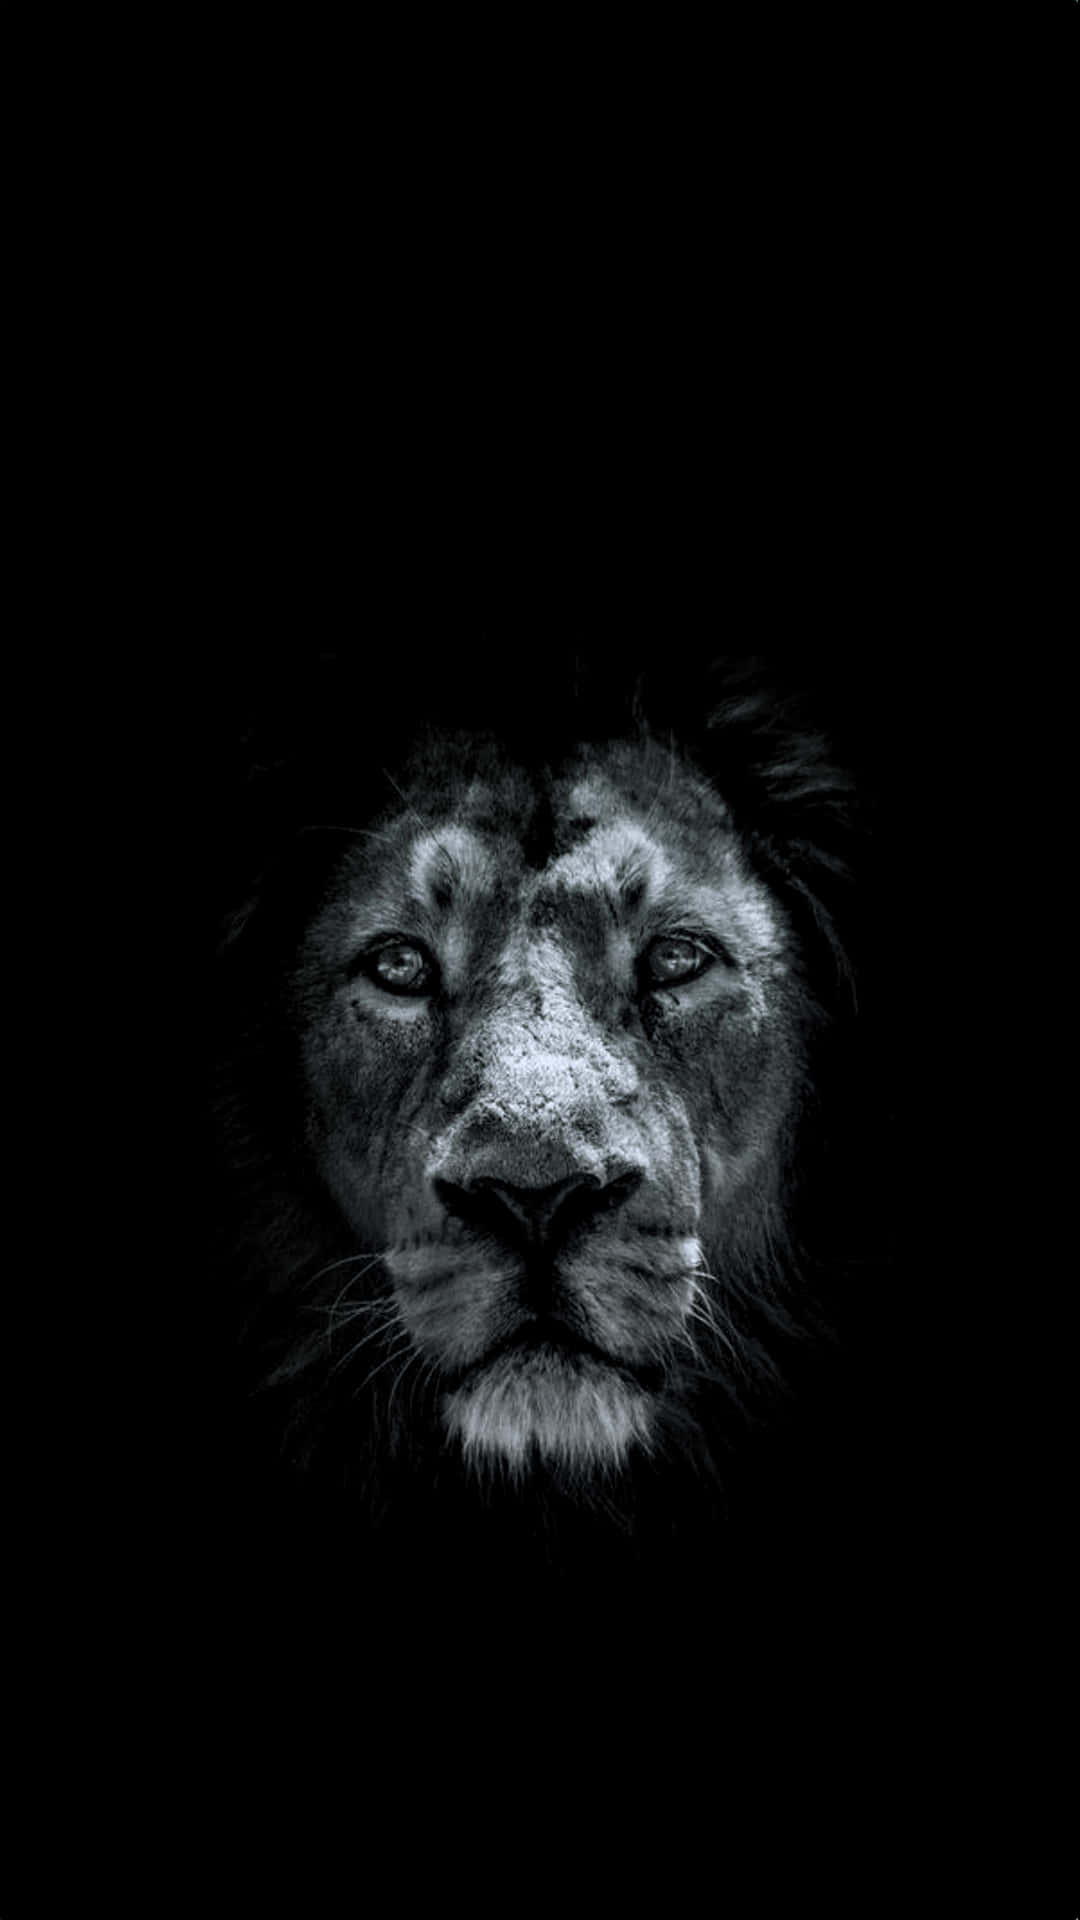 A Black And White Lion Face On A Black Background Wallpaper